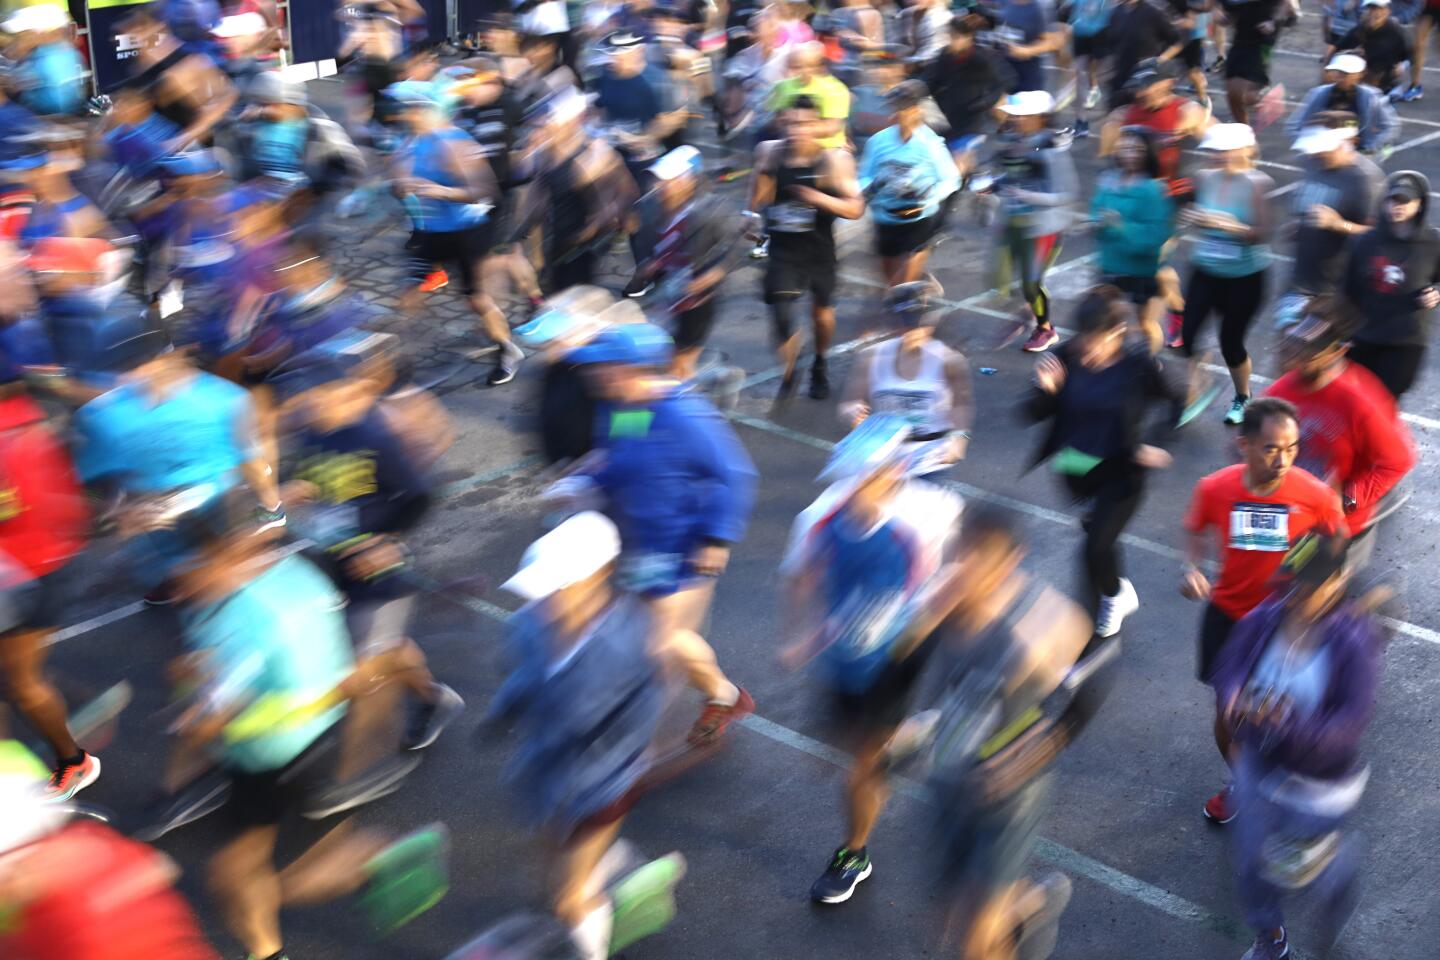 A time exposure shows runners in motion at the start of the 2020 L.A. Marathon at Dodger Stadium.